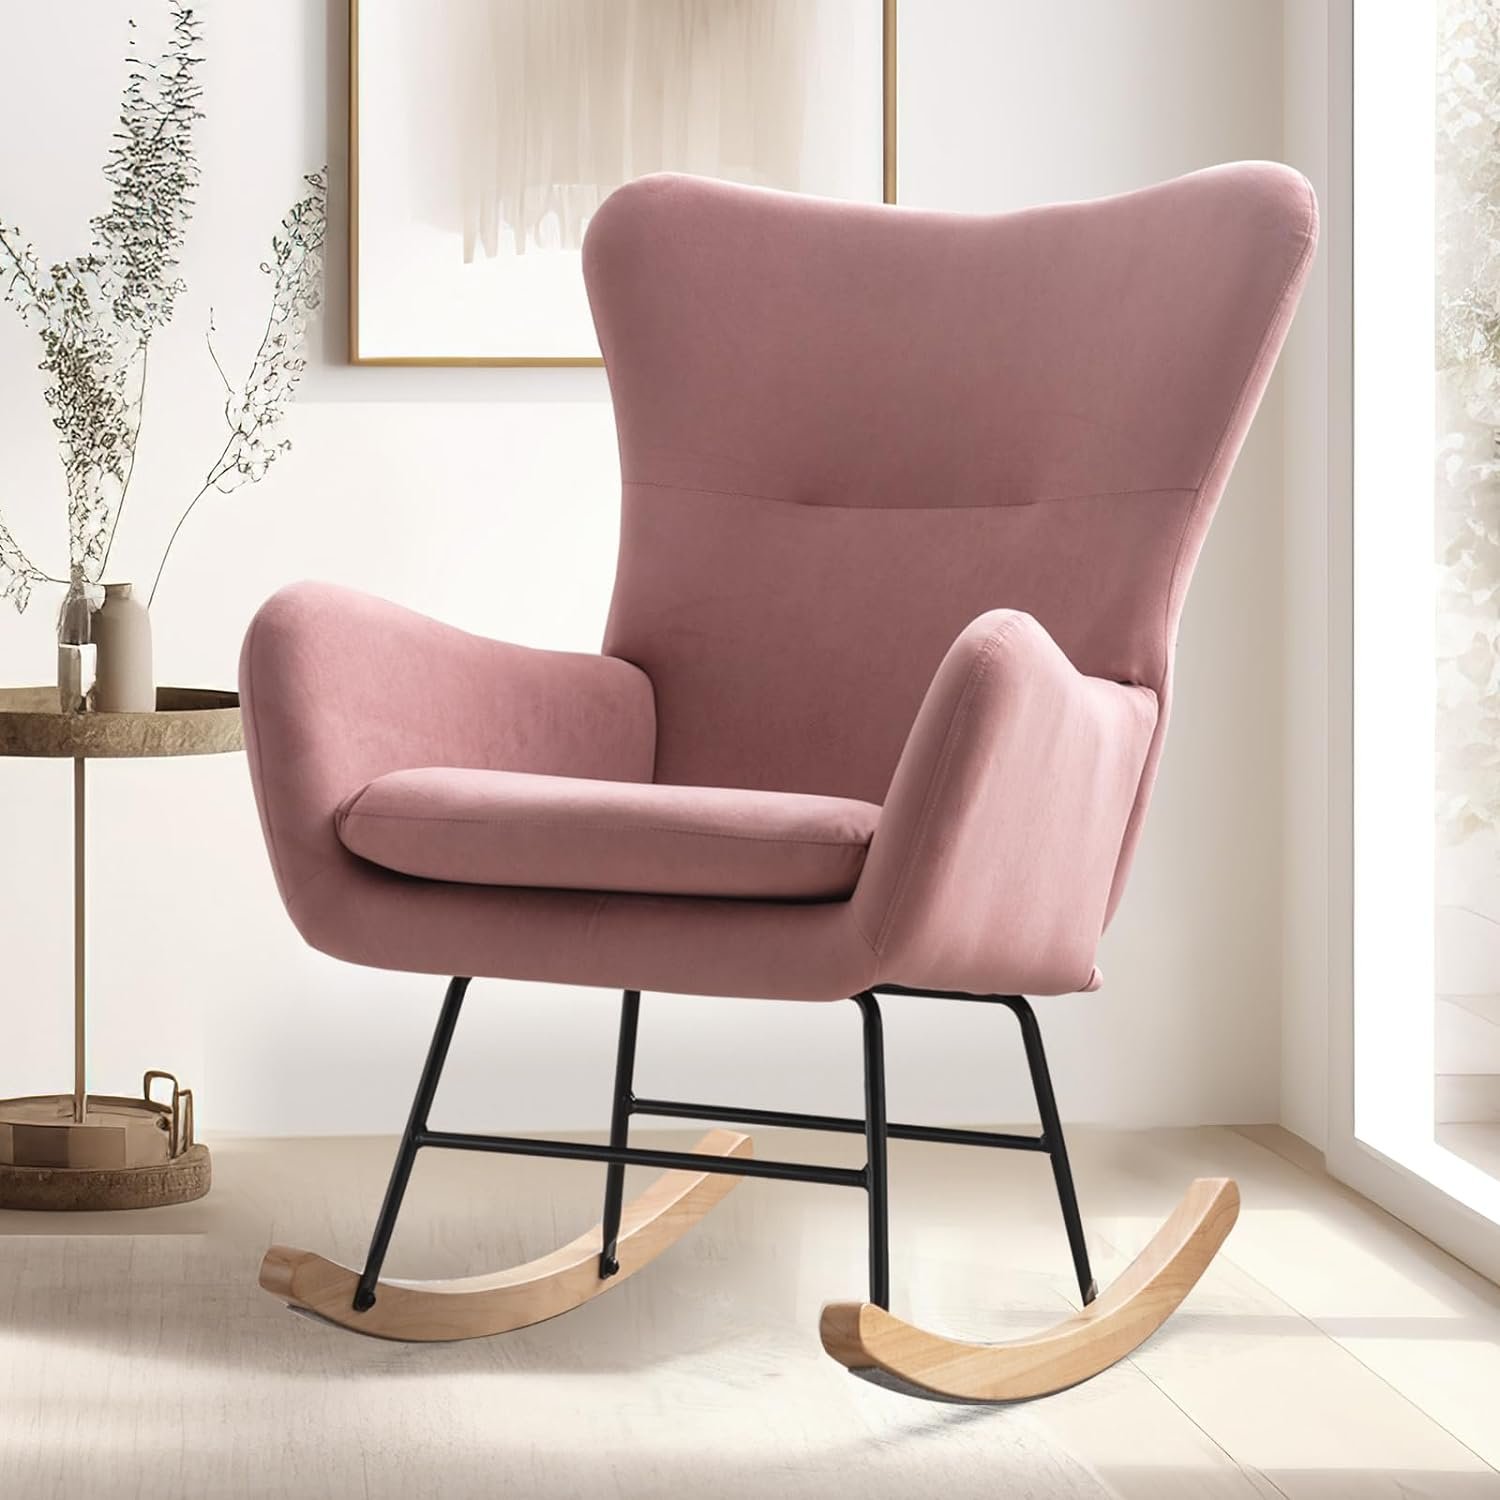 Bonzy Home Velvet Rocking Accent Nursery Chair Small Upholstered Glider Rocker Chair for Baby Nursery Padded Seat with High Backrest Armchair Comfy Side Chair Bedroom Living Room Chair, Pink